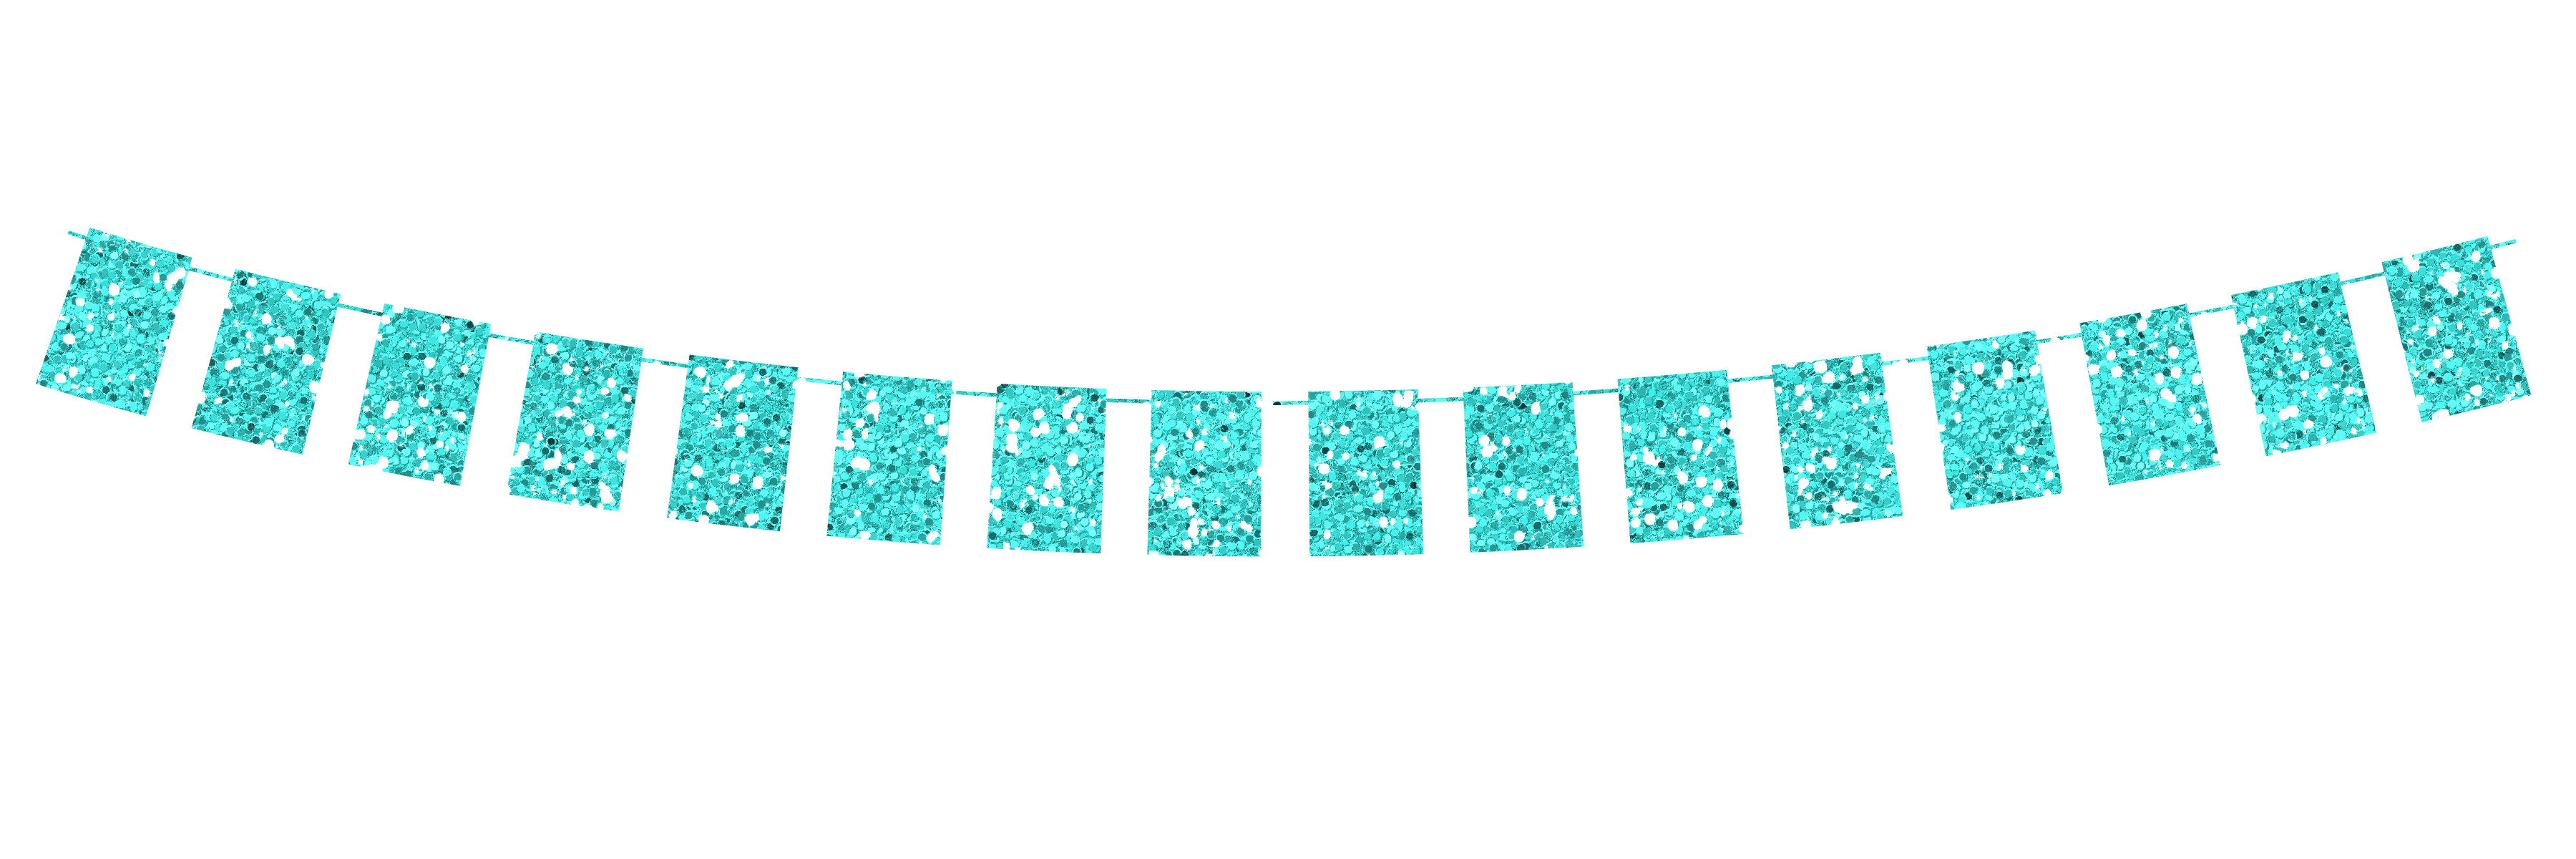 banner flag garland square rectangle box turquoise teal...